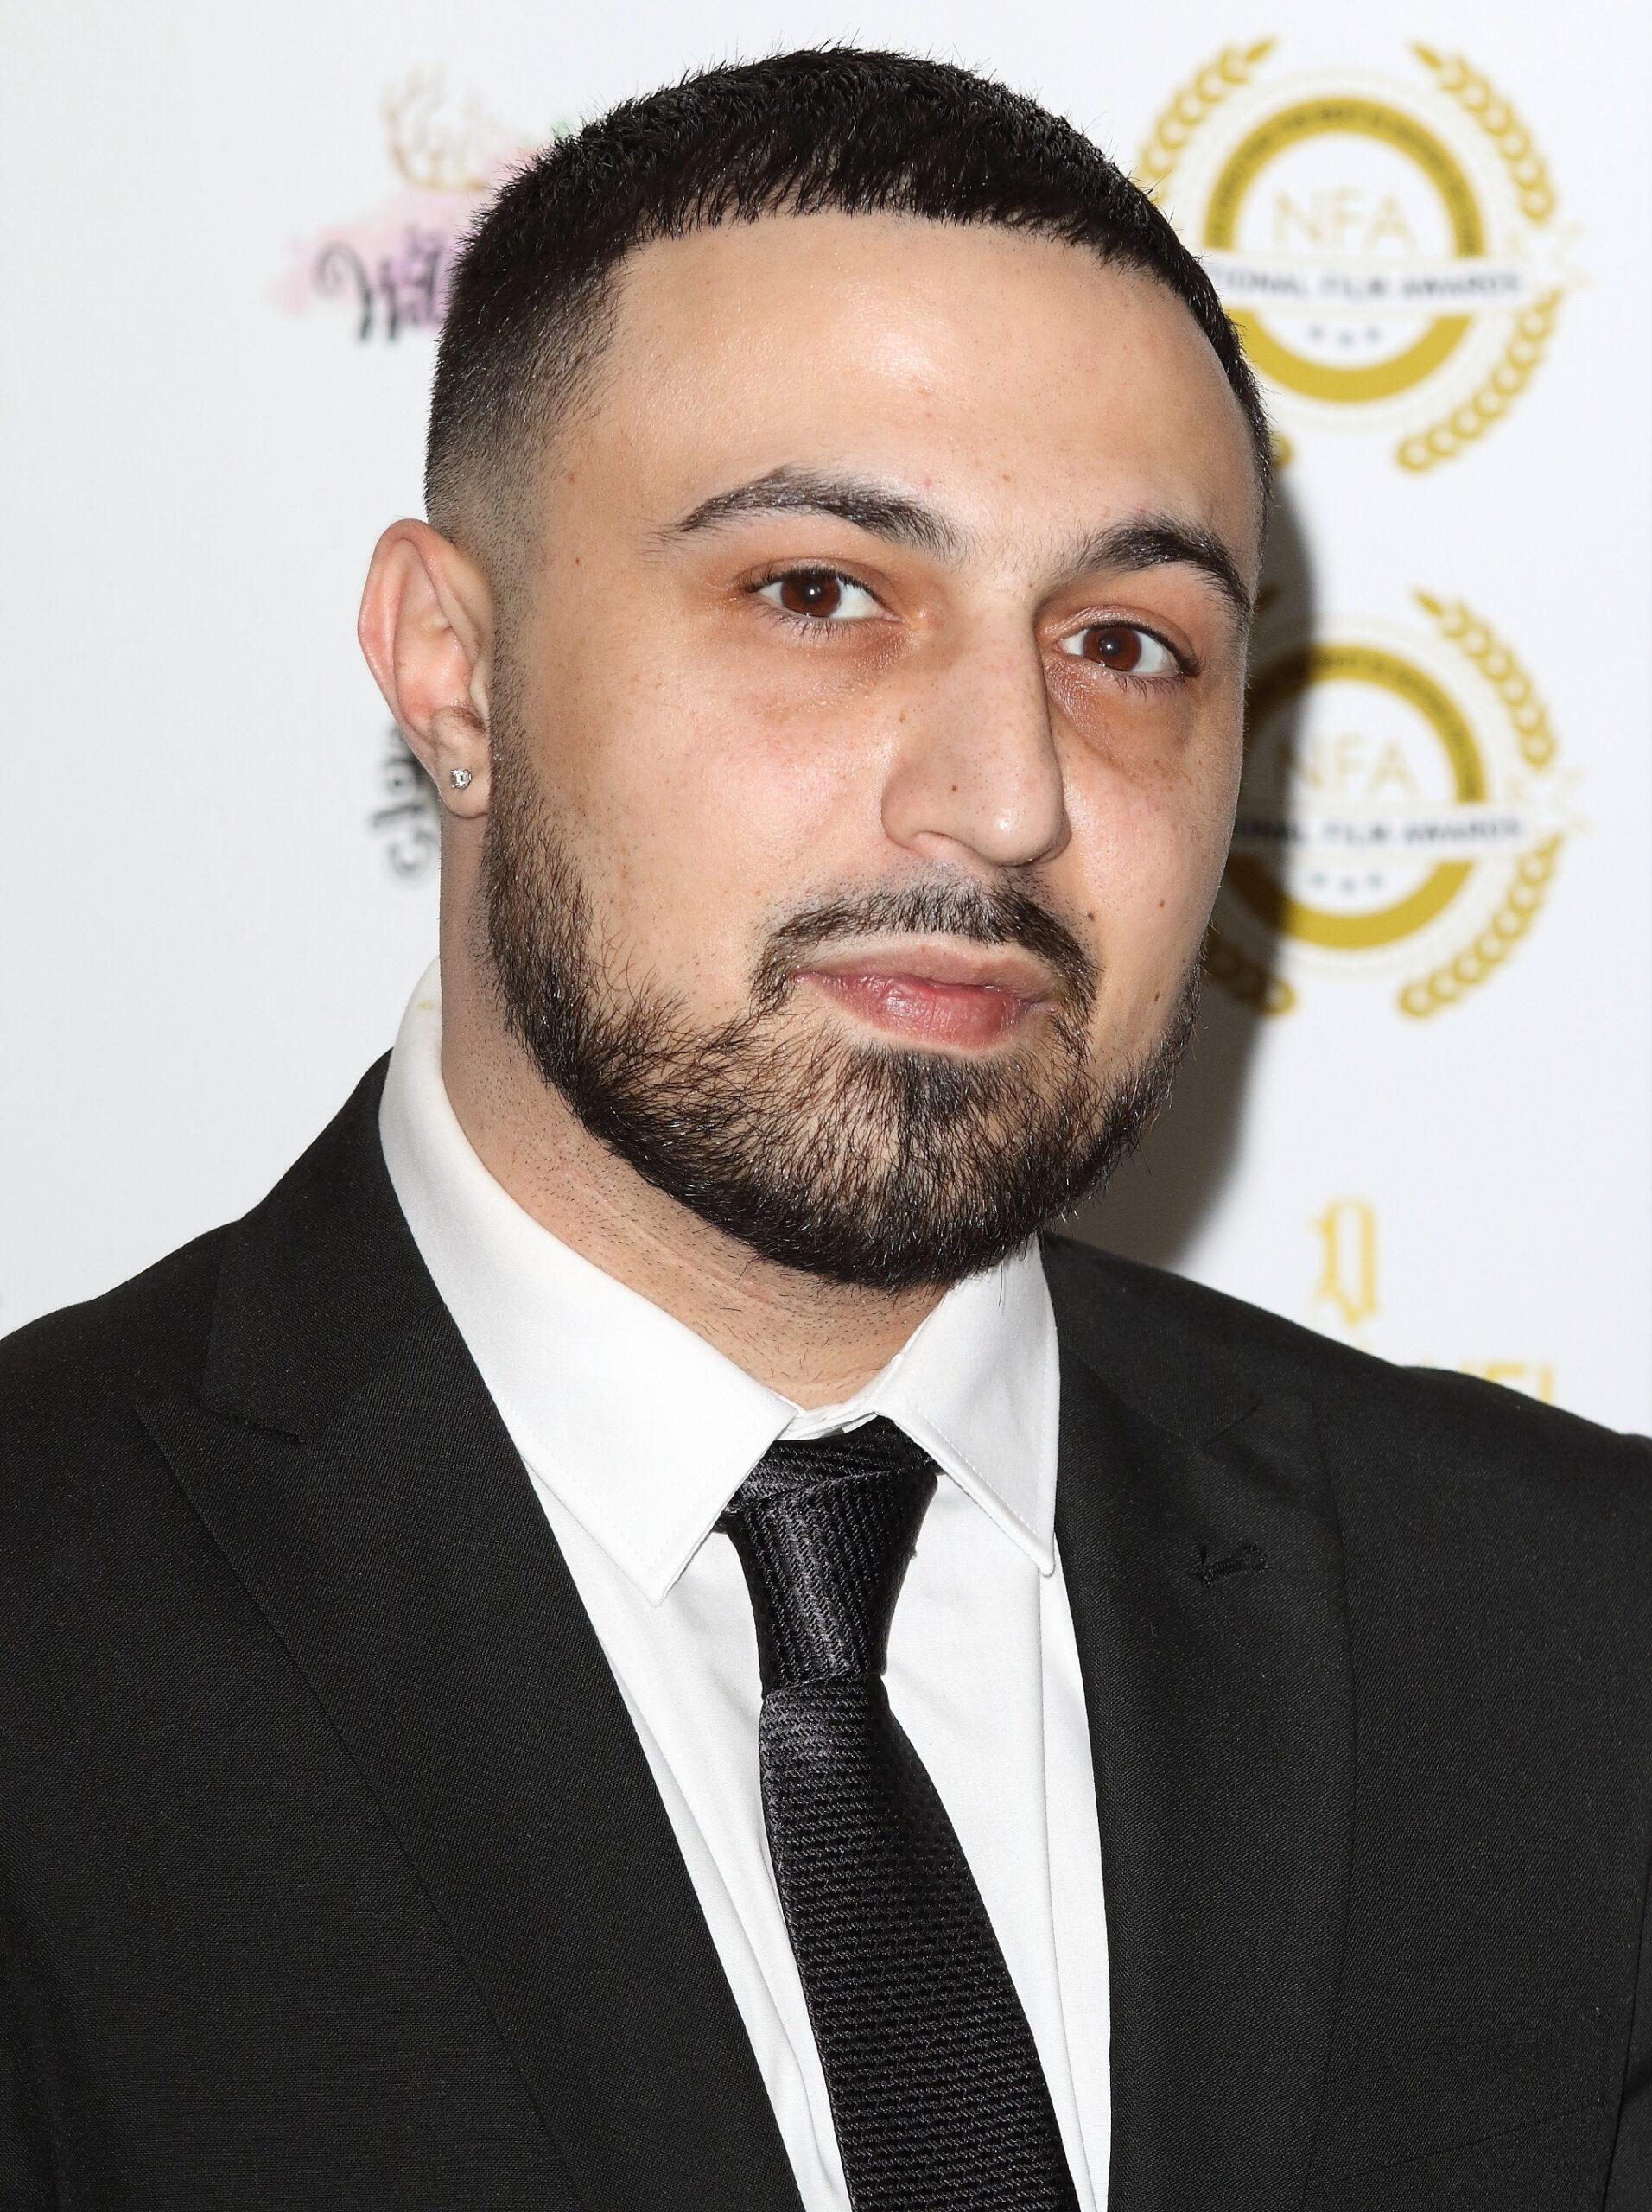 Adam Deacon at the National Film Awards